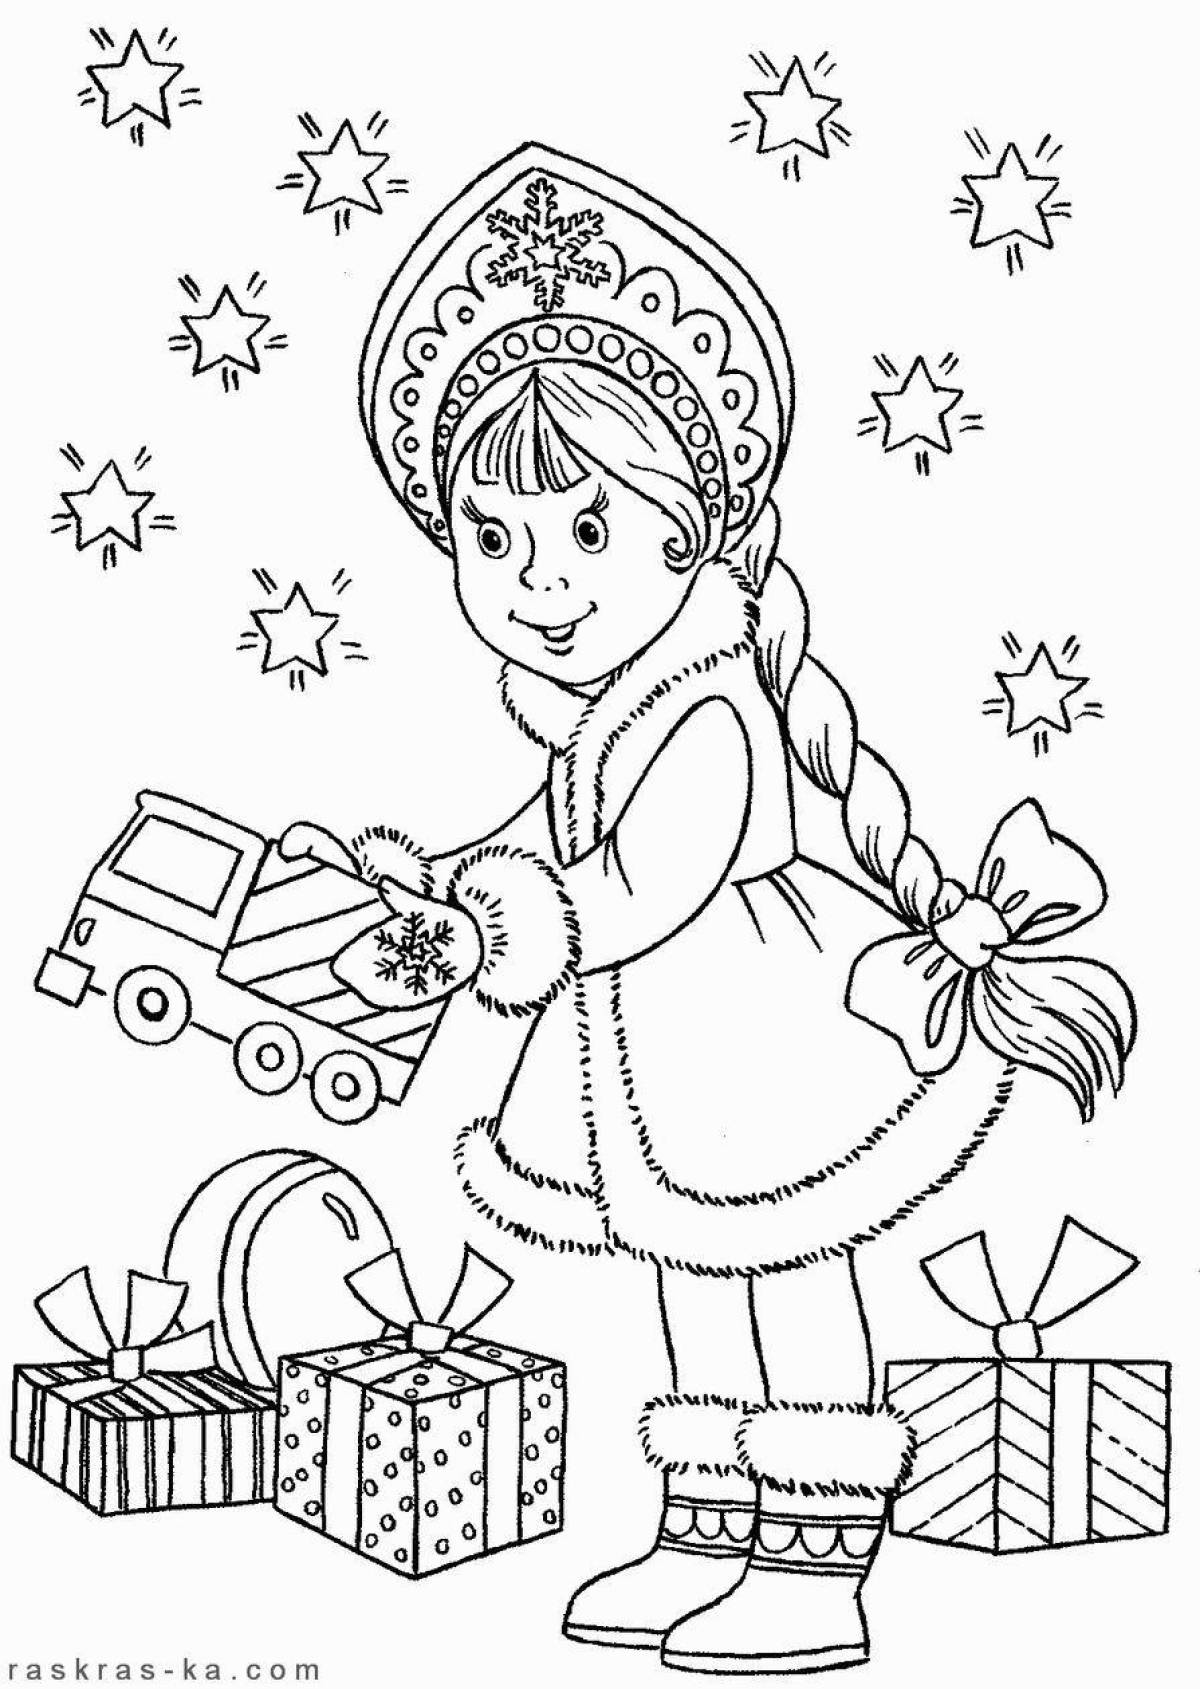 Snow Maiden funny coloring book